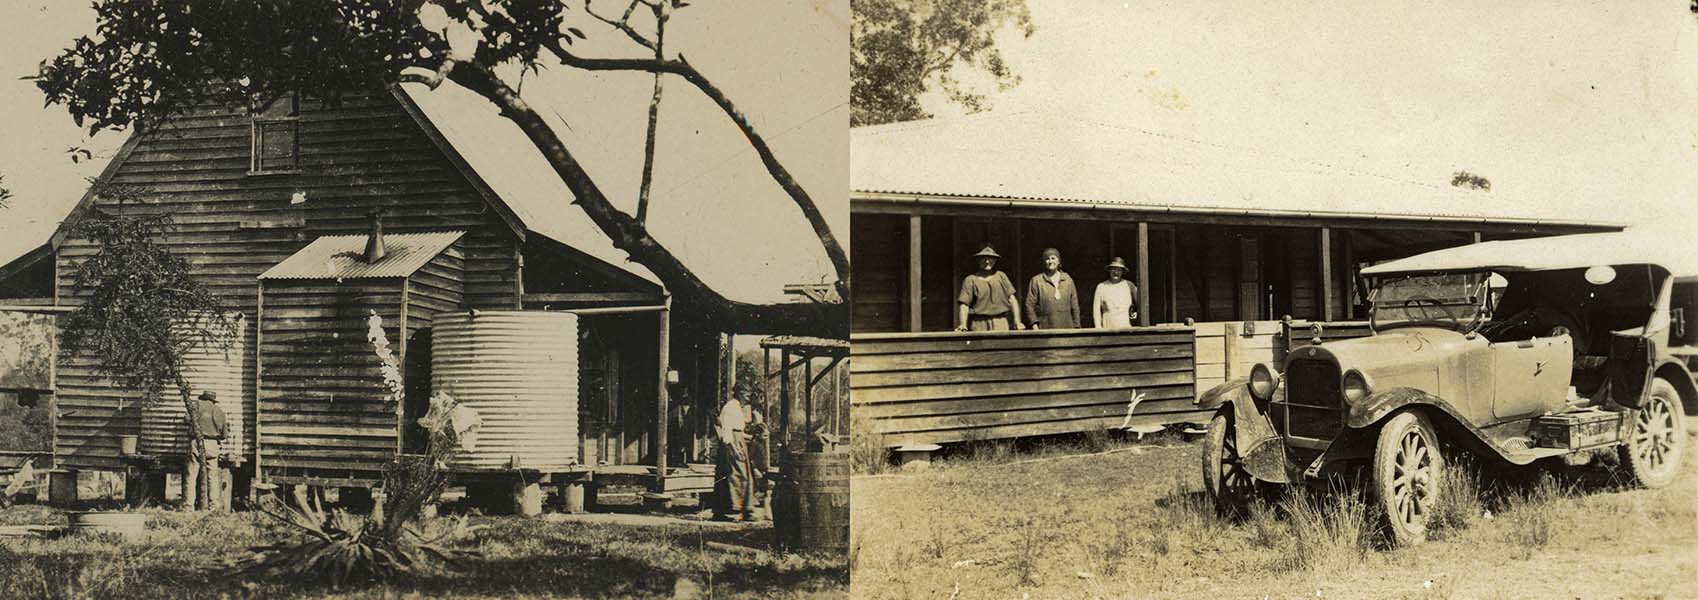 Bankfoot House 1915 (left) and mid-1940s (right). From its humble beginnings in 1878 until late into the 1950s, Bankfoot House remained unpainted. Initially left raw, the timber may have eventually been oiled with linseed oil. However limited physical evidence of this layer was found during the paint analysis.